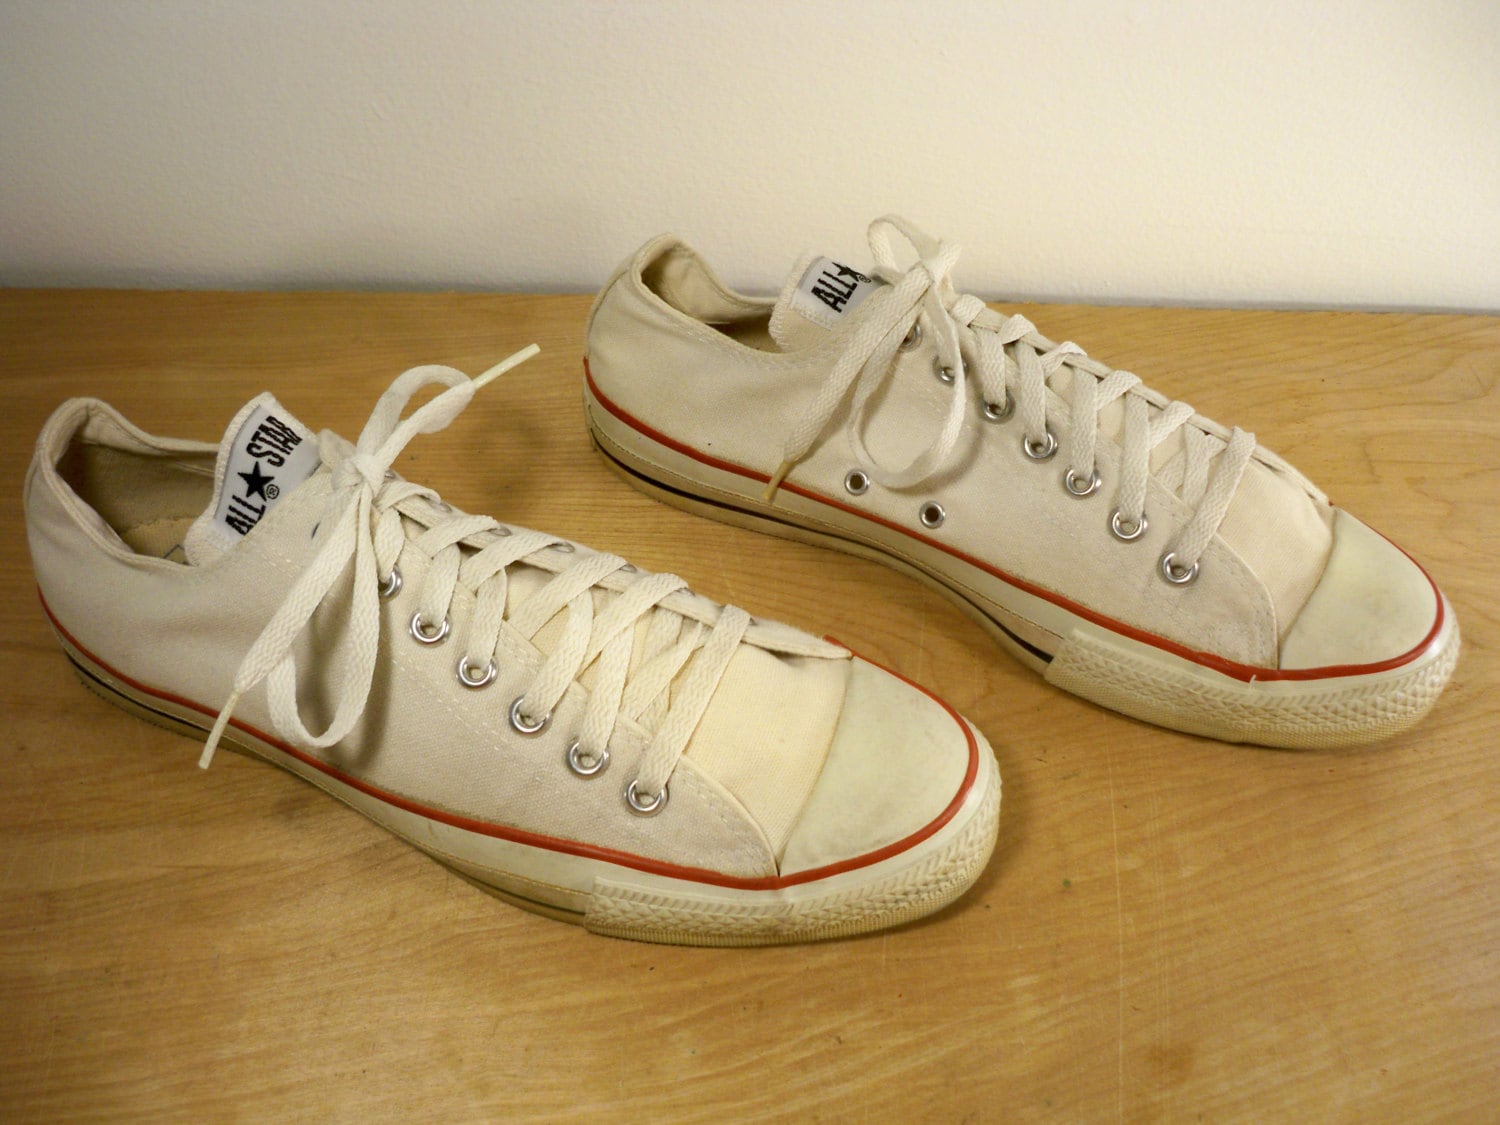 Vintage Converse All Star White Made in USA Low Top by Joeymest